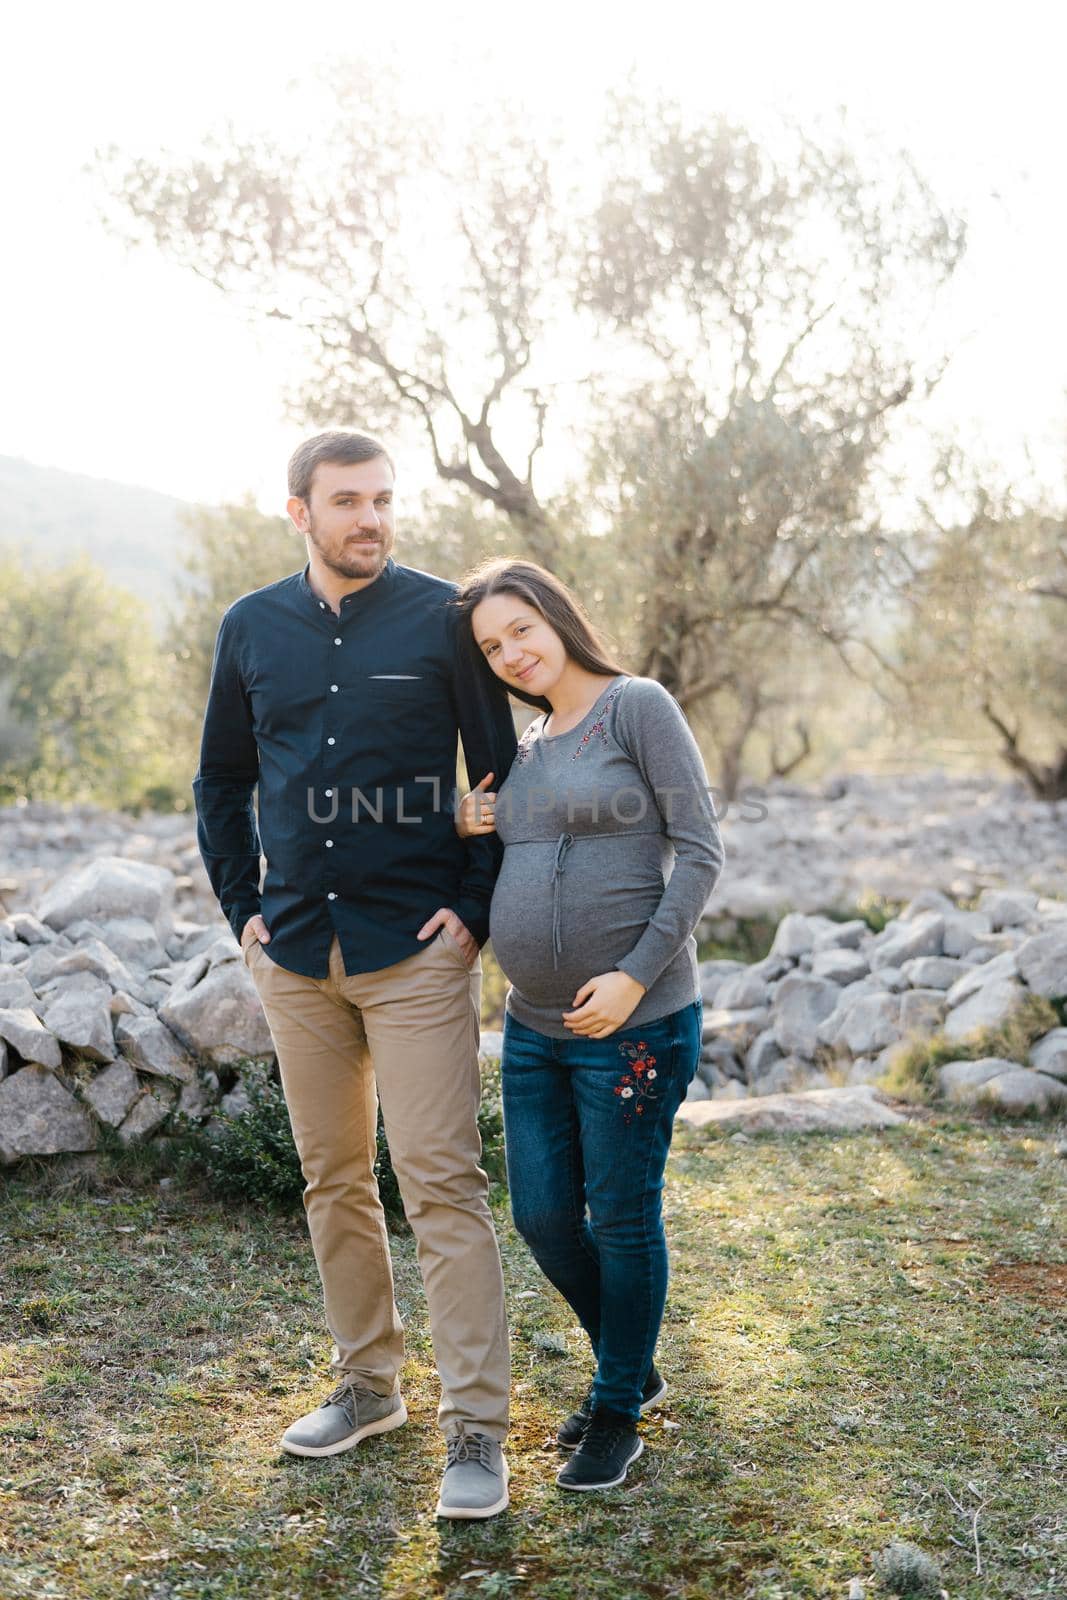 Smiling pregnant woman holding the arm of a man in a grove. High quality photo